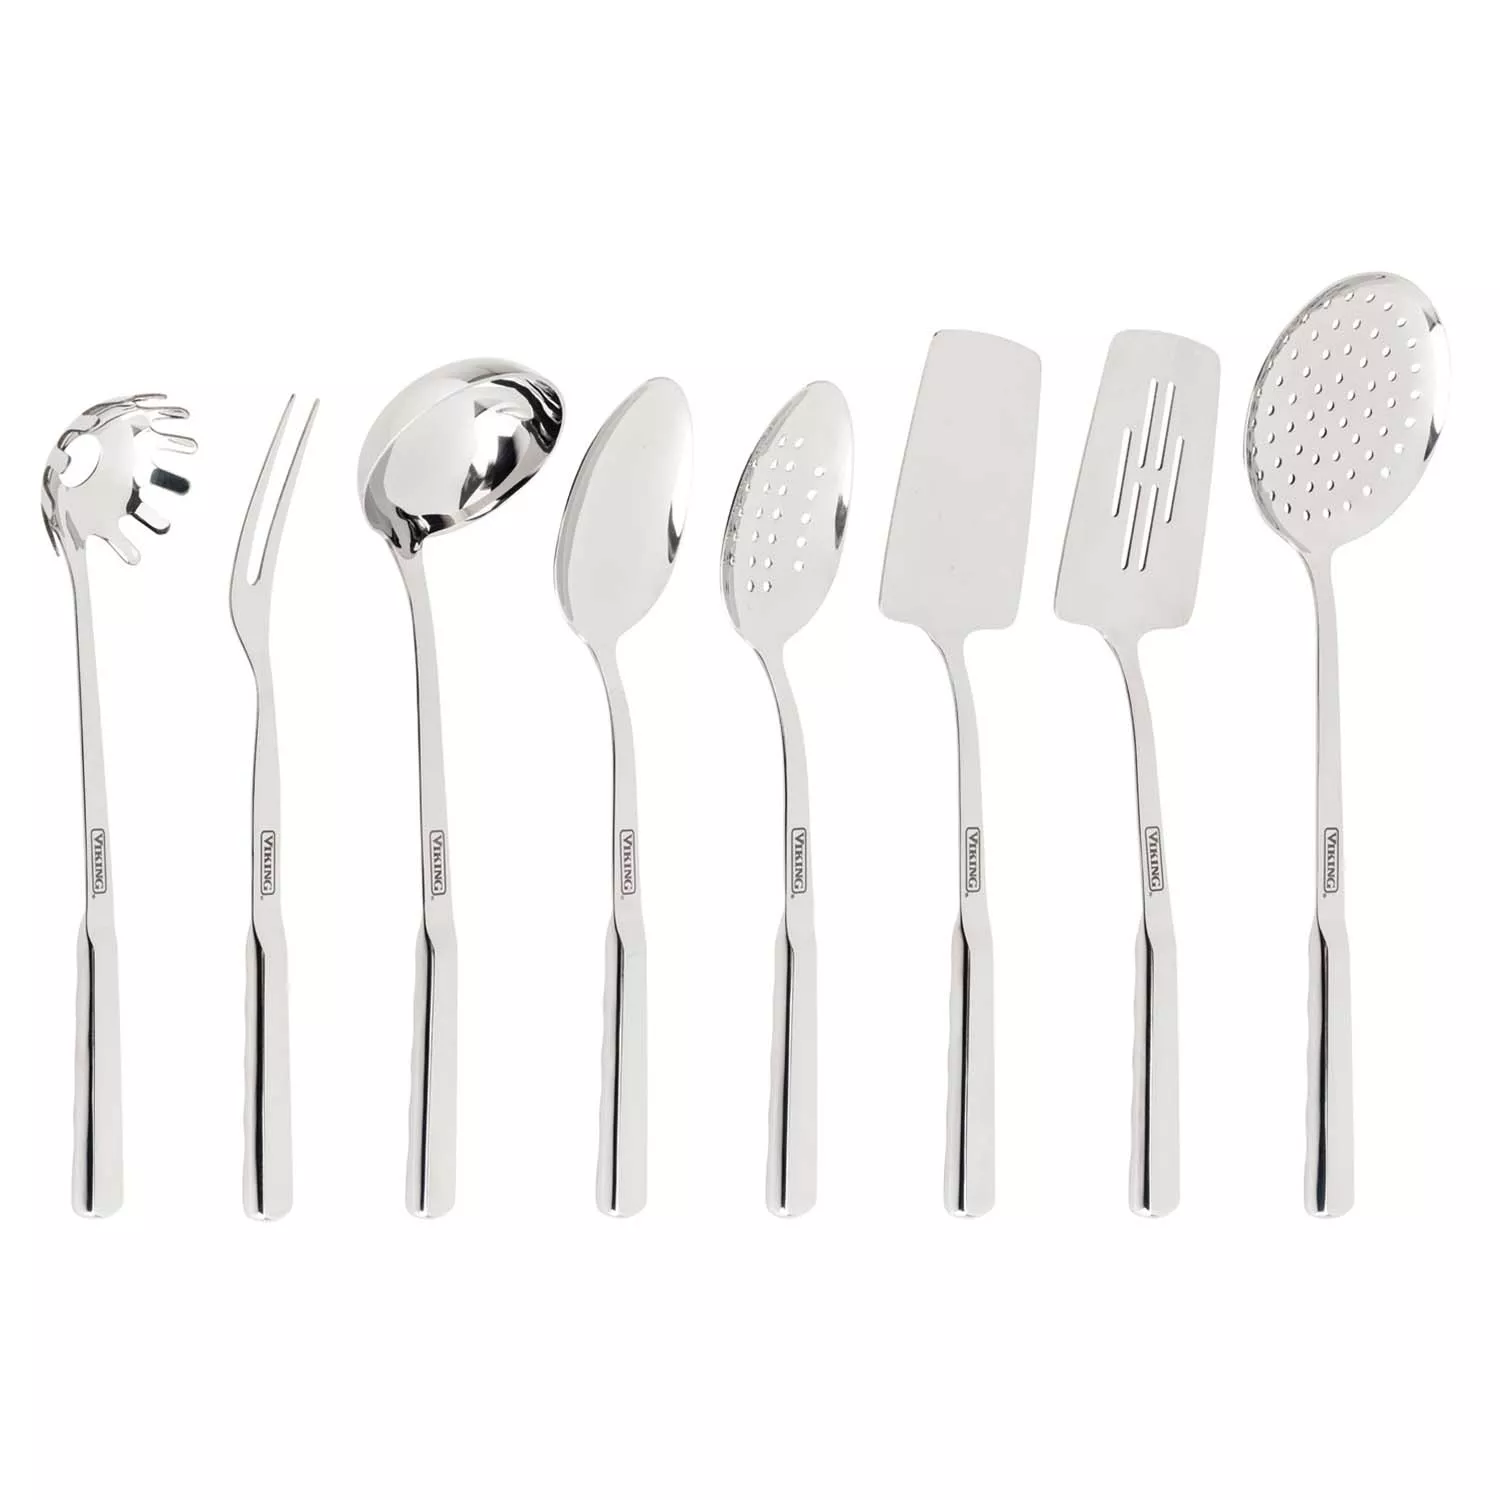  Chef Craft Select Kitchen Tool and Utensil Set, 8